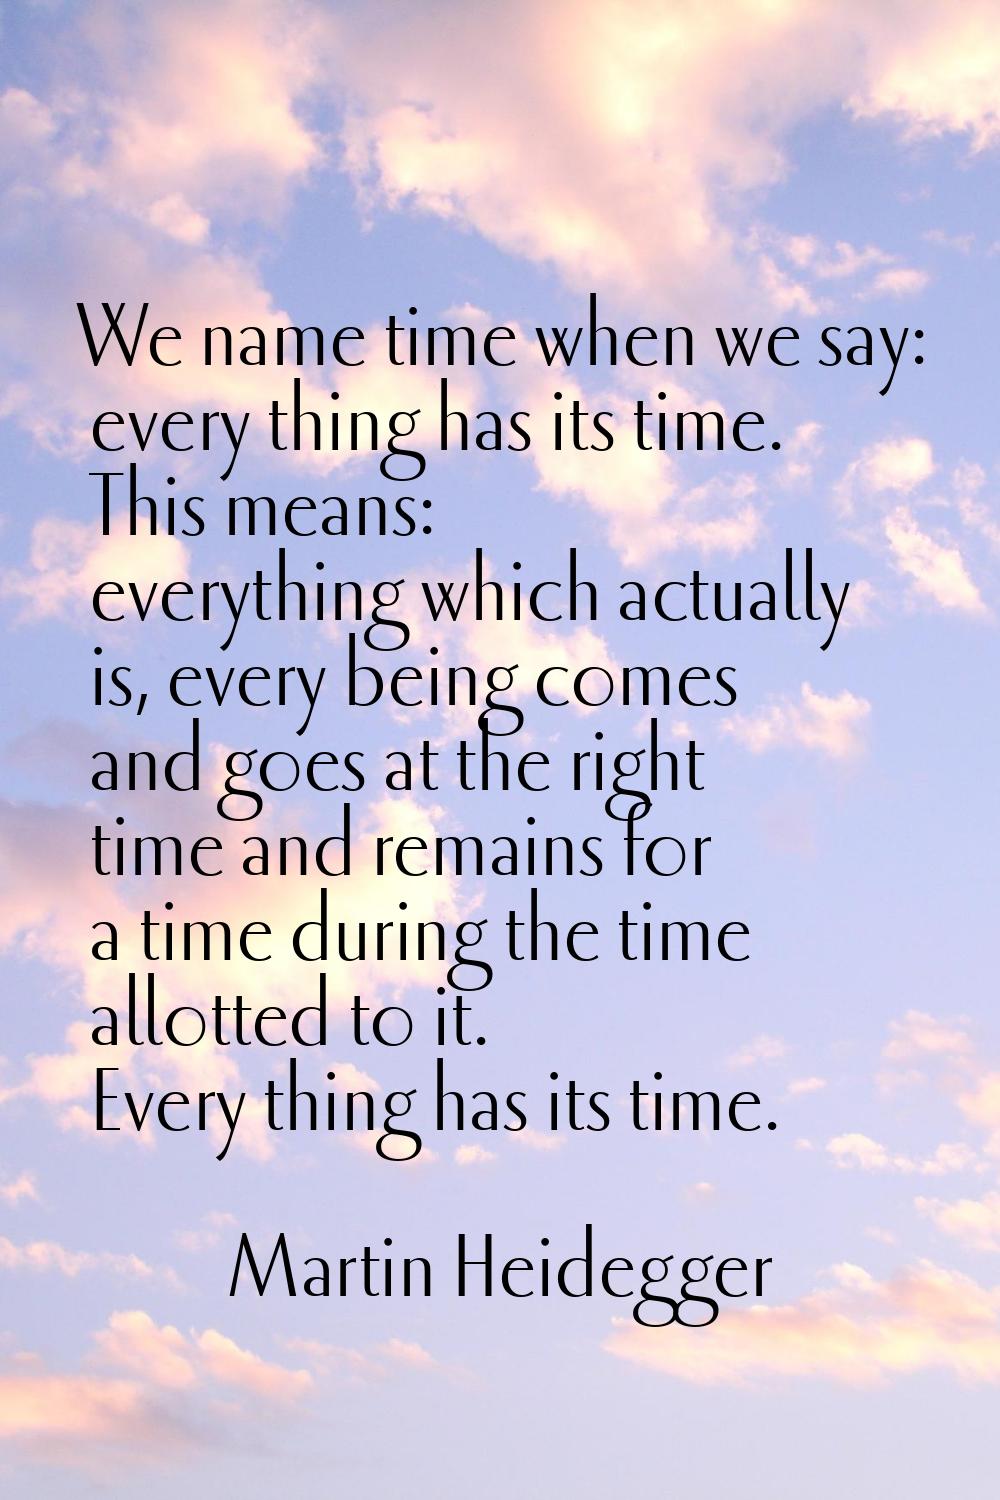 We name time when we say: every thing has its time. This means: everything which actually is, every